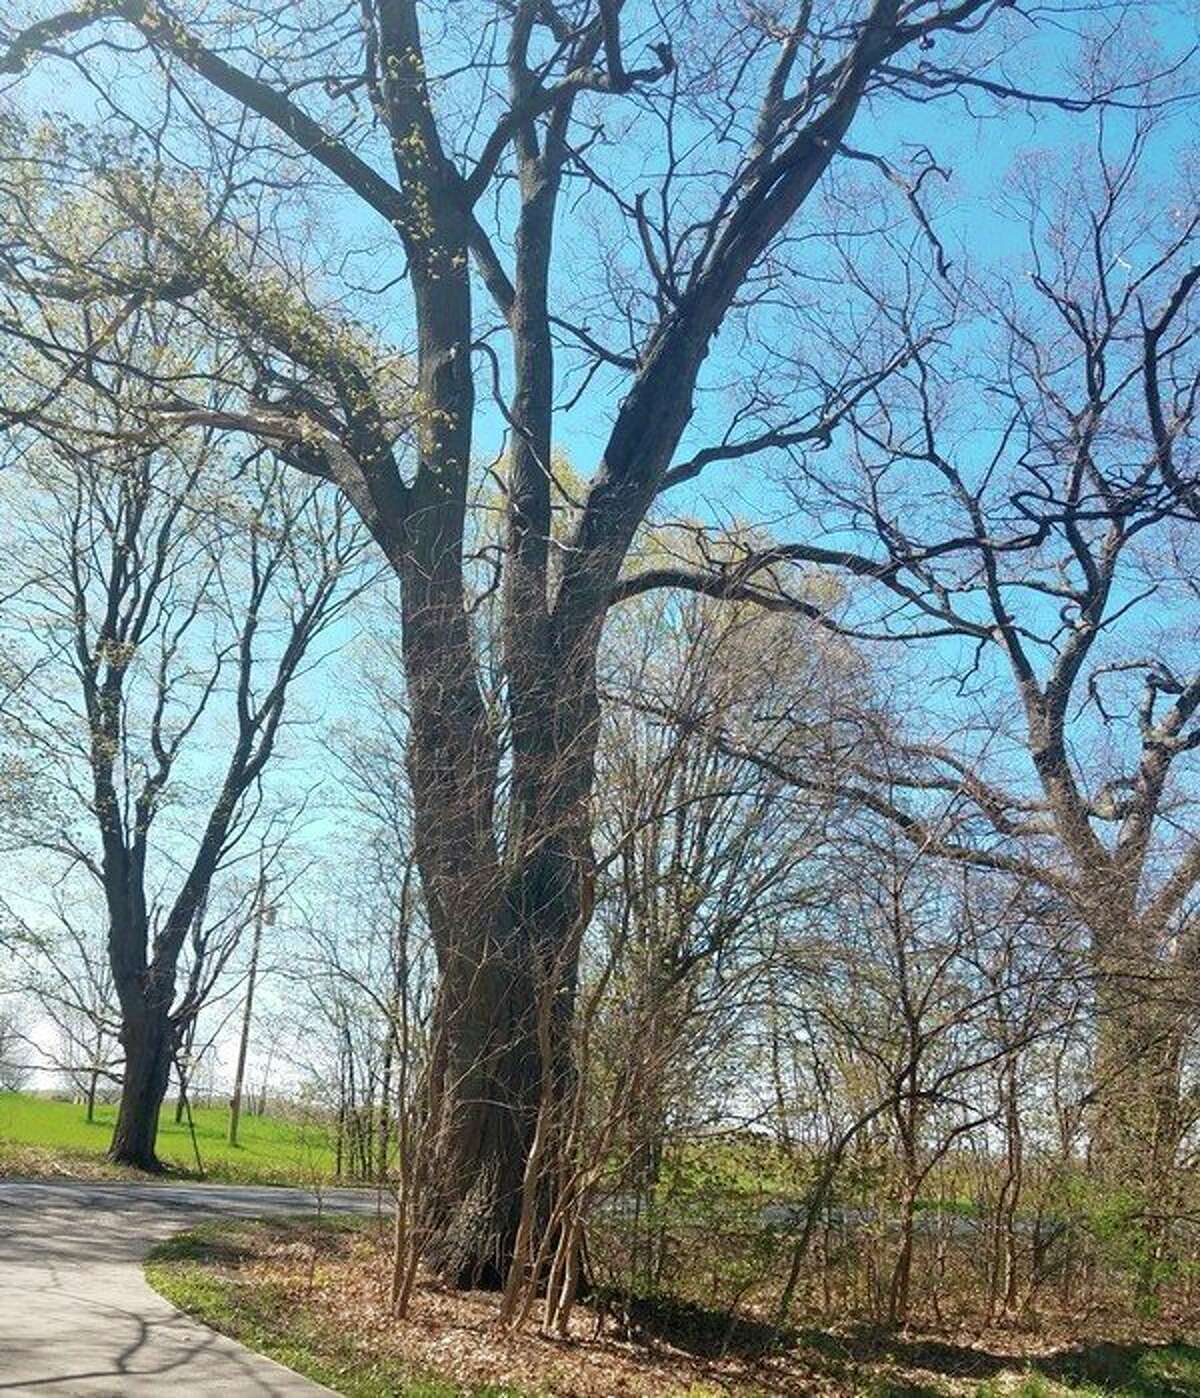 The largest tree in Manistee County was submitted to the Michigan Big Tree Hunt contest by James Mckenzie. It is a Northern Red Oak measuring 237 inches around, located in Brethren. (Courtesy photo)